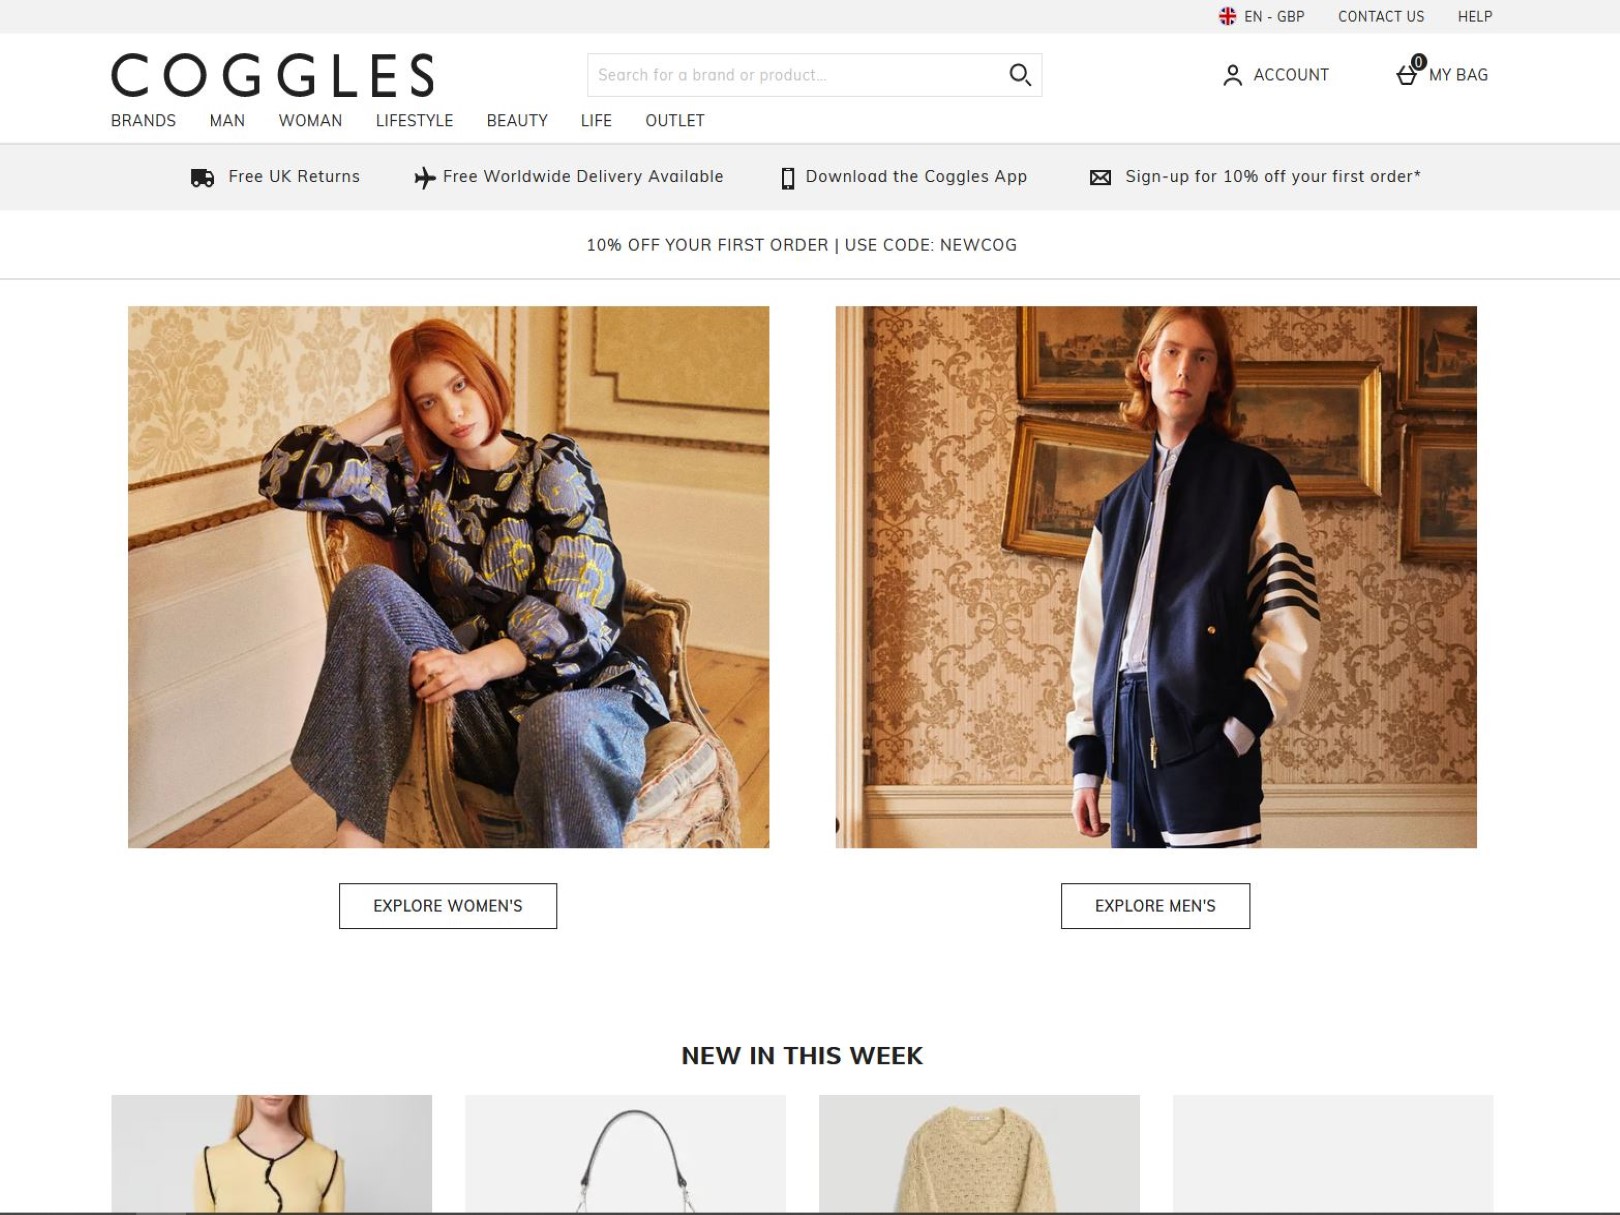 Coggles - Clothing, Homeware, and Beauty Products | ReviewCollections